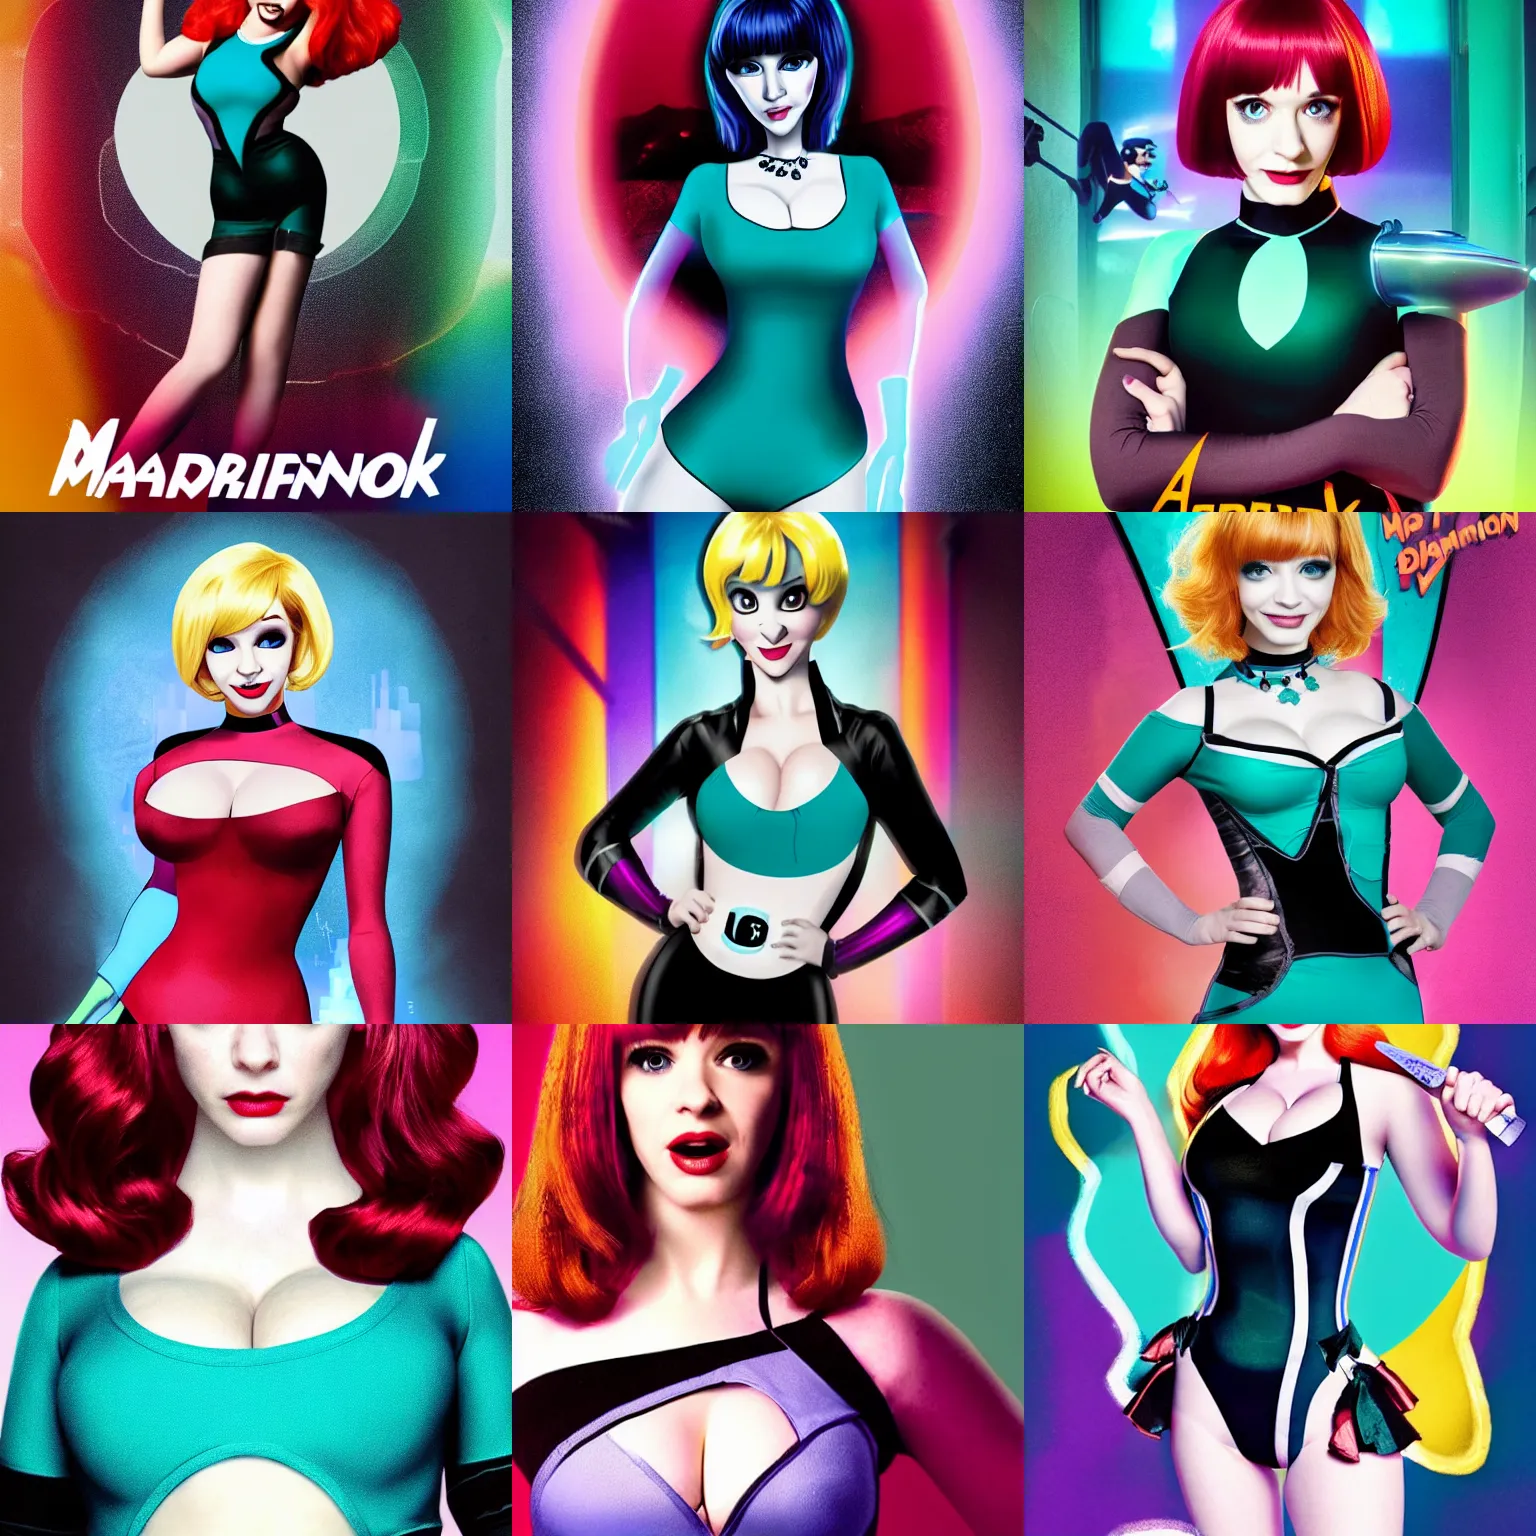 Prompt: a cinematic poster of christina hendricks as maddie fenton from the live - action netflix series'danny phantom'; auburn hair ; bob cut ; straight bangs ; loose - fitting teal bodysuit with black neck ; digital photograph